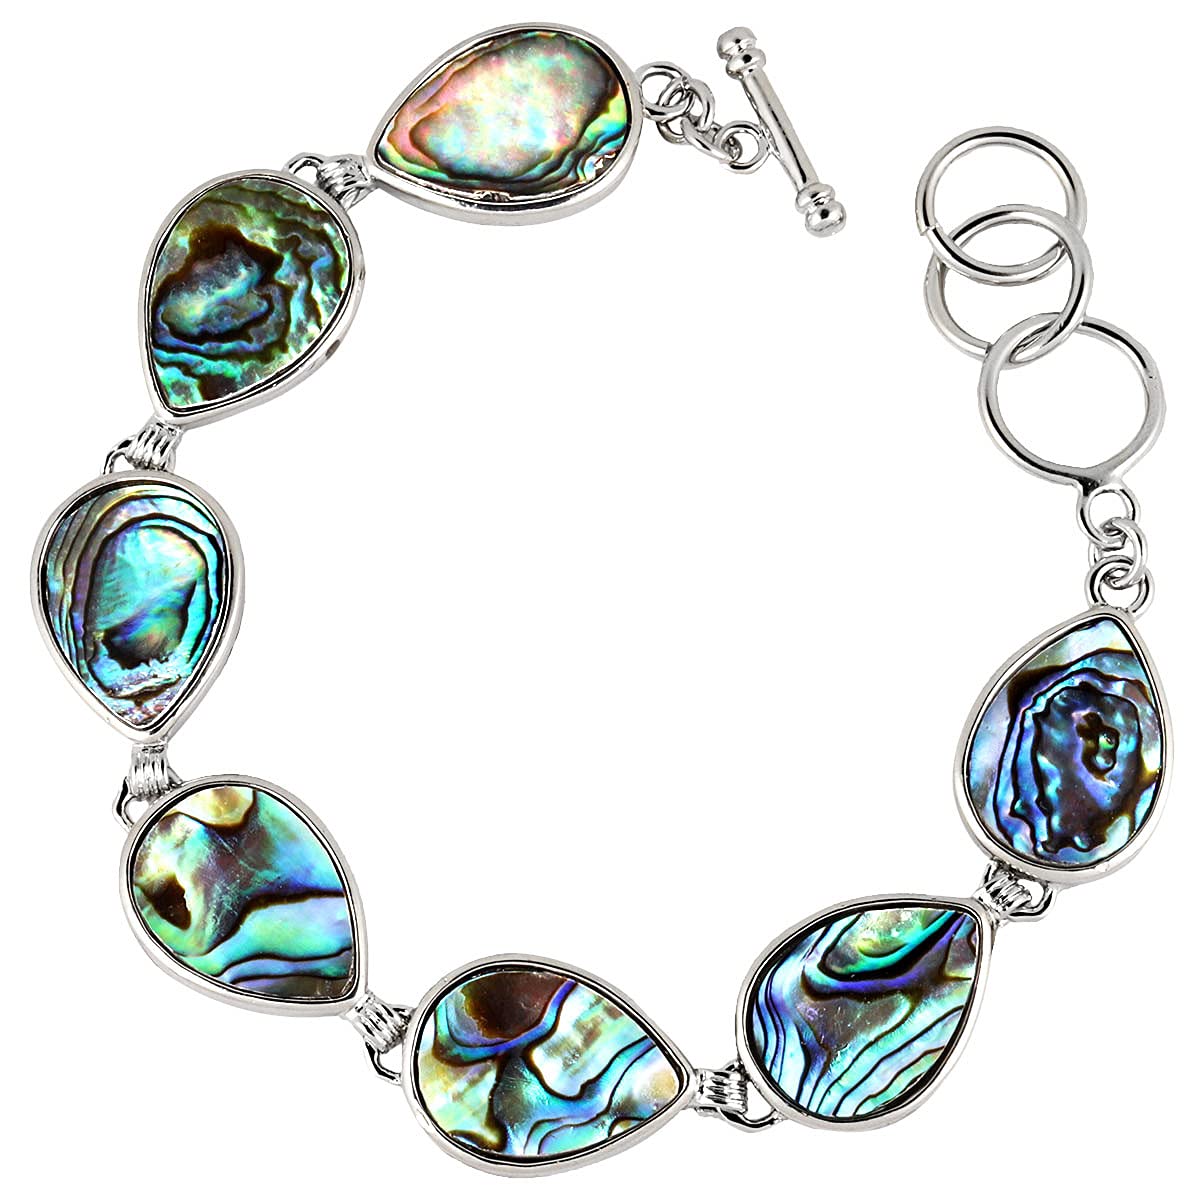 Book Cover SUNYIK Natural Abalone Shell Bracelet for Women and Man, Adjustable Link Bangle for Unisex, Assorted Shapes #1-abalone shell teardrop shape